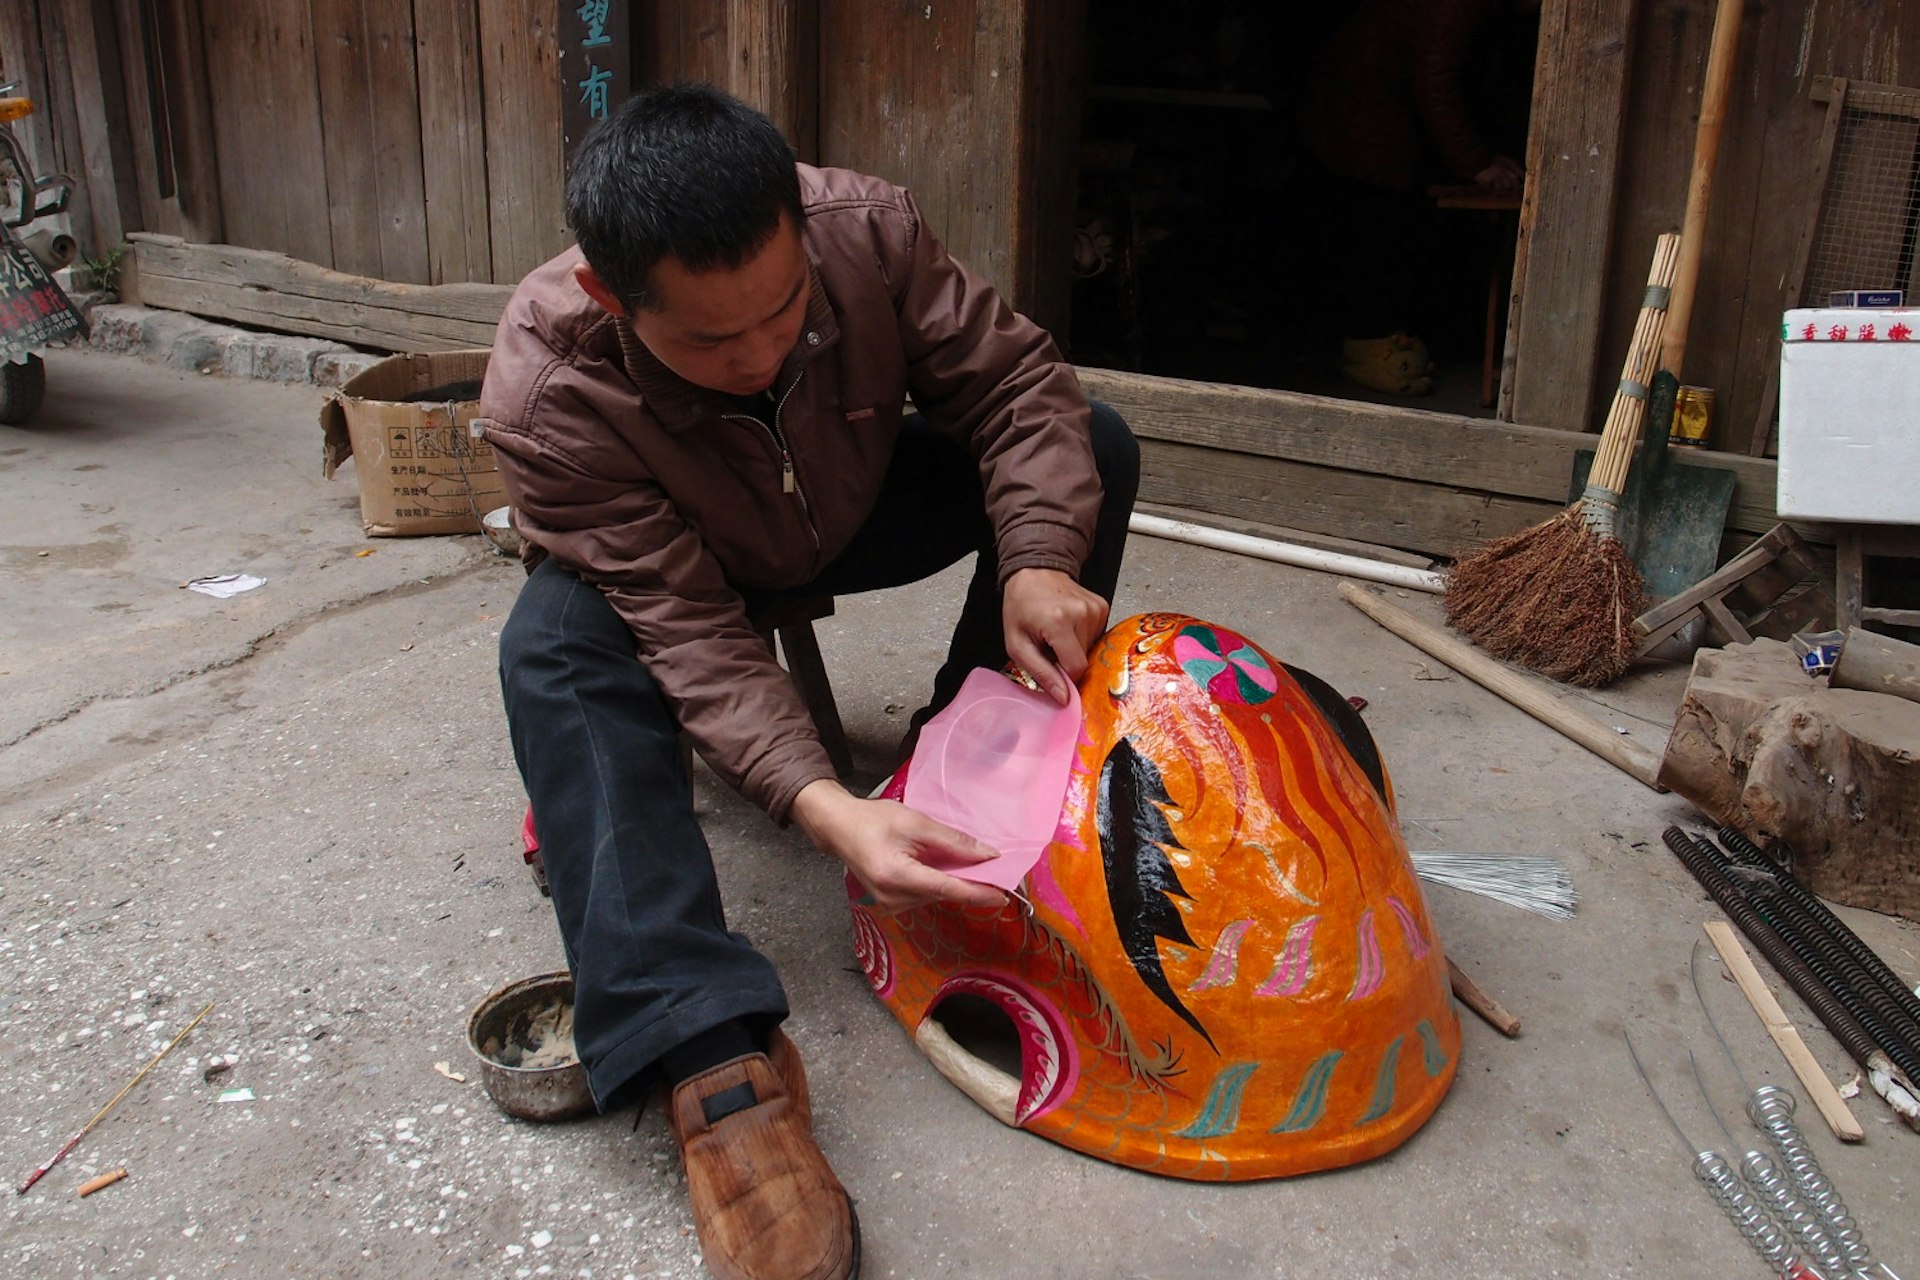 Daxu craftsman putting the finishing touches on a papier mache lion's head. Image by Piera Chen / Lonely Planet